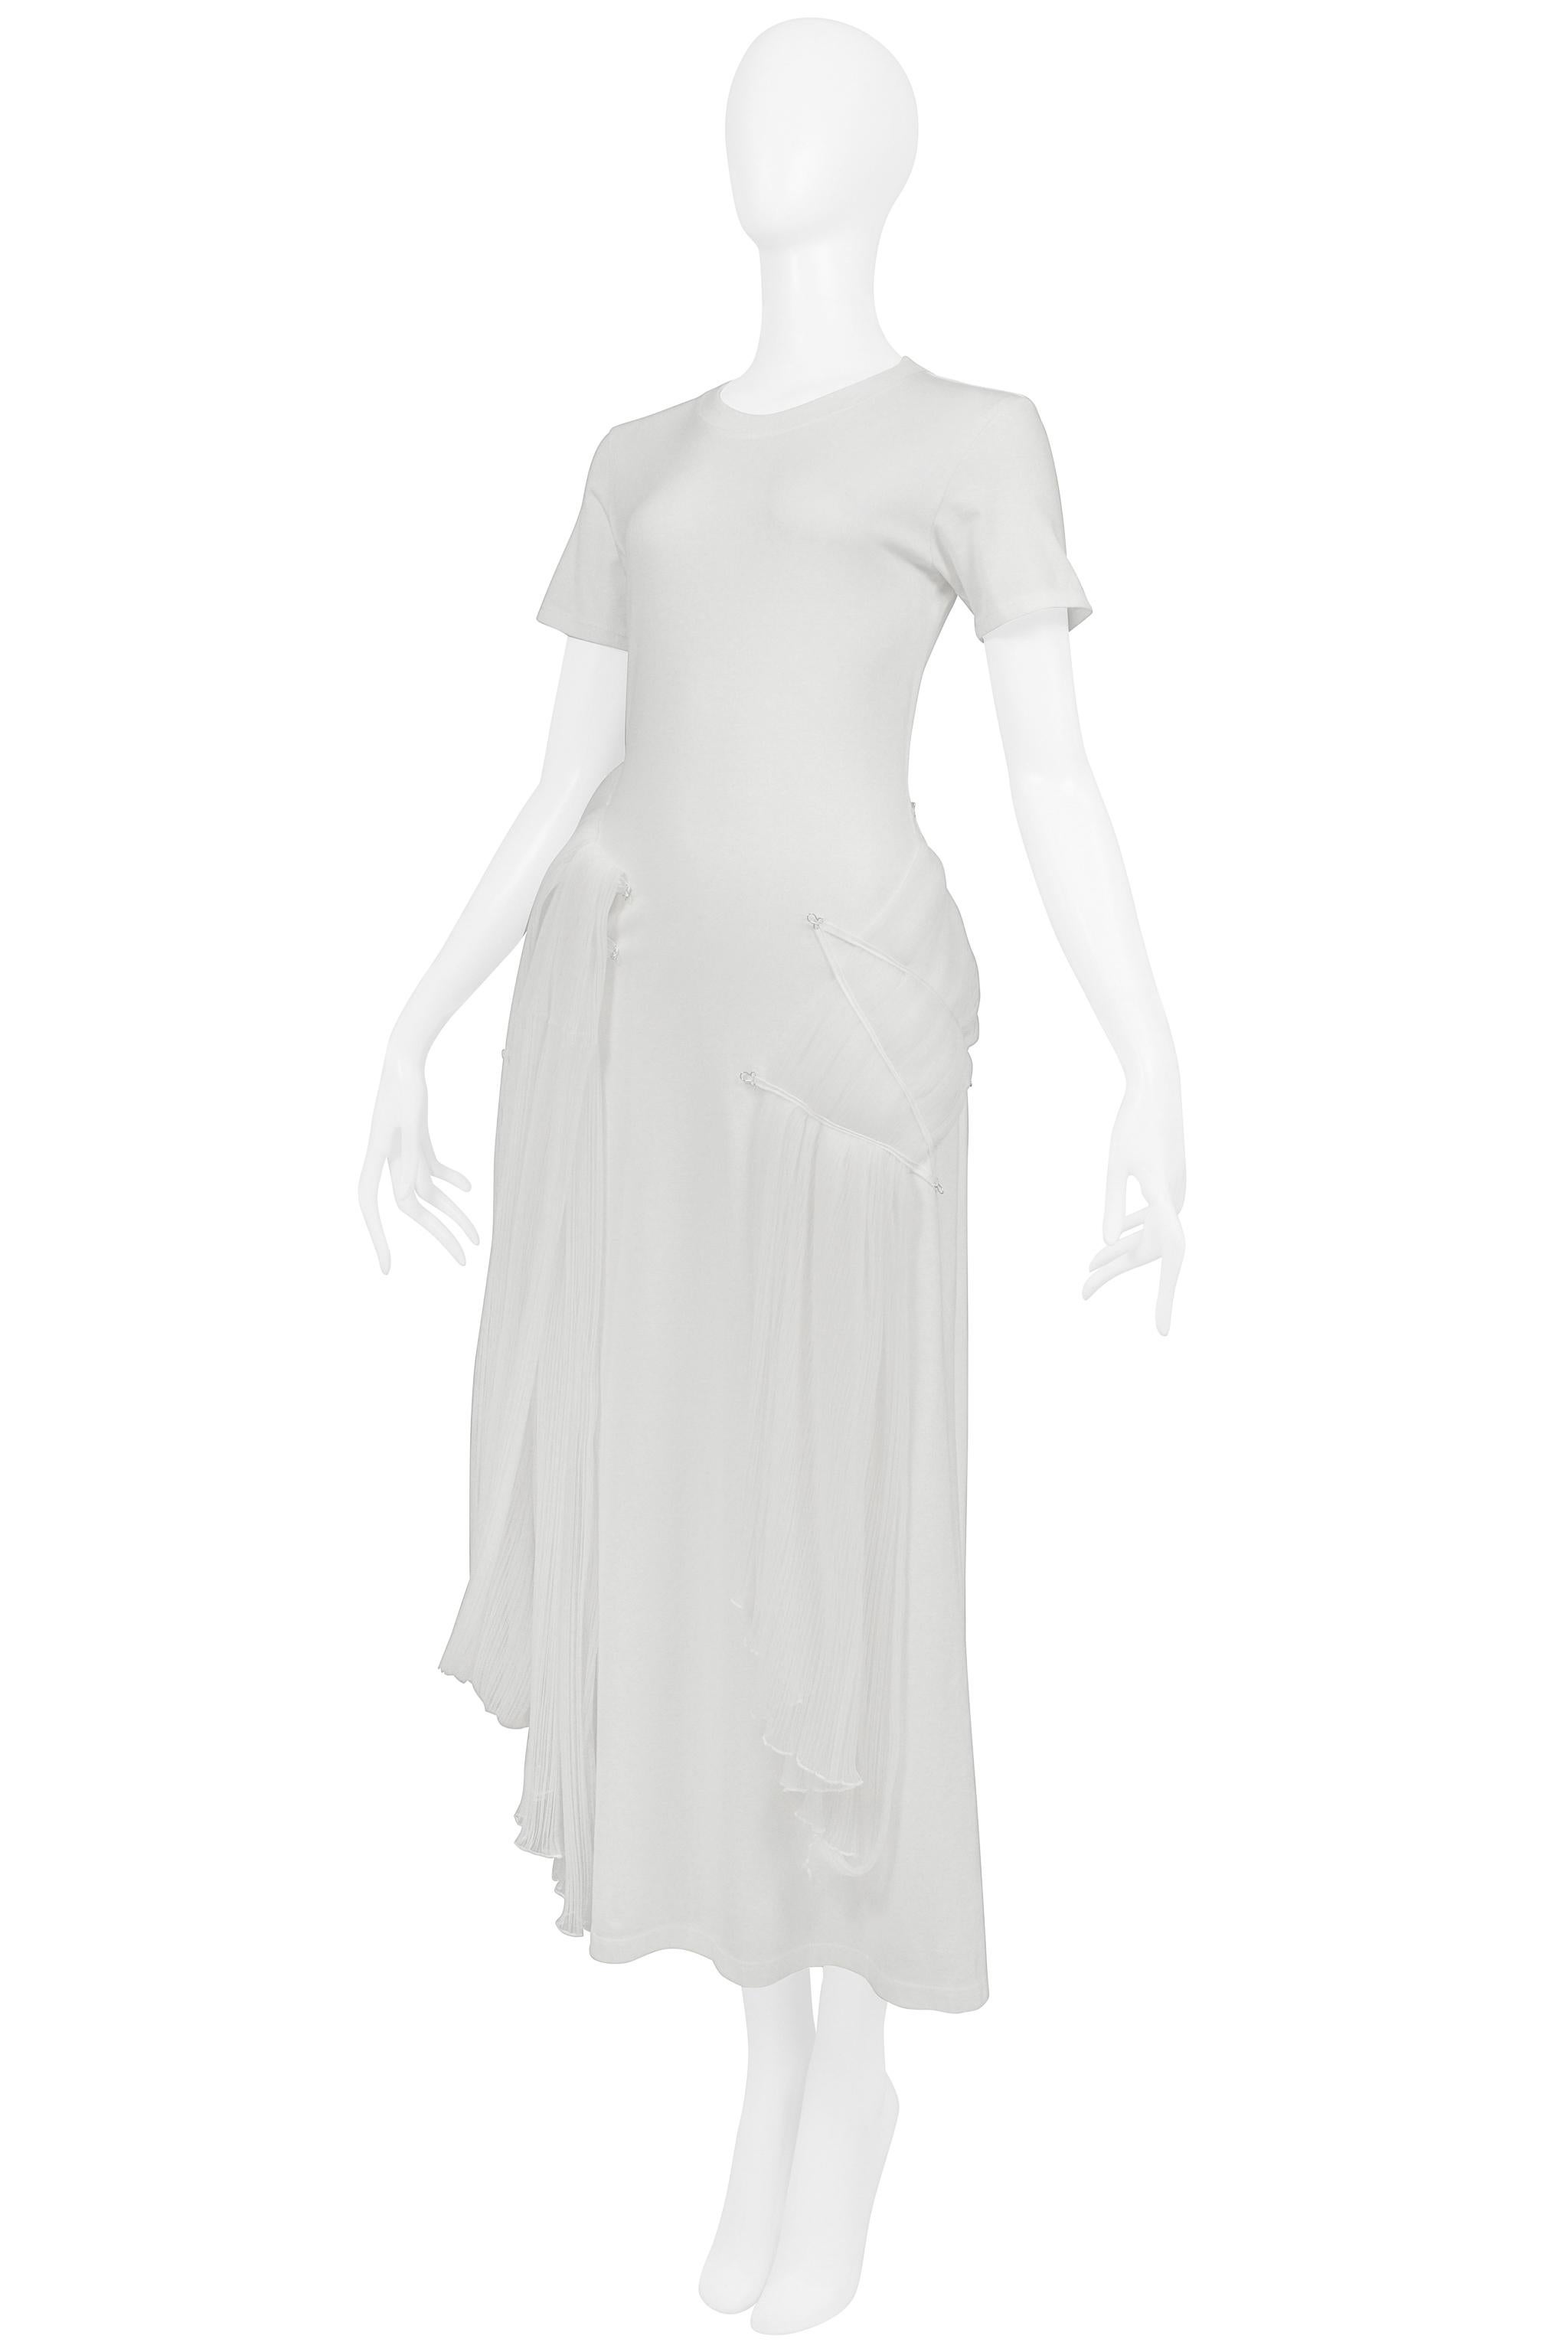 Issey Miyake Iconic White Goddess Concept Dress 2003 For Sale 1